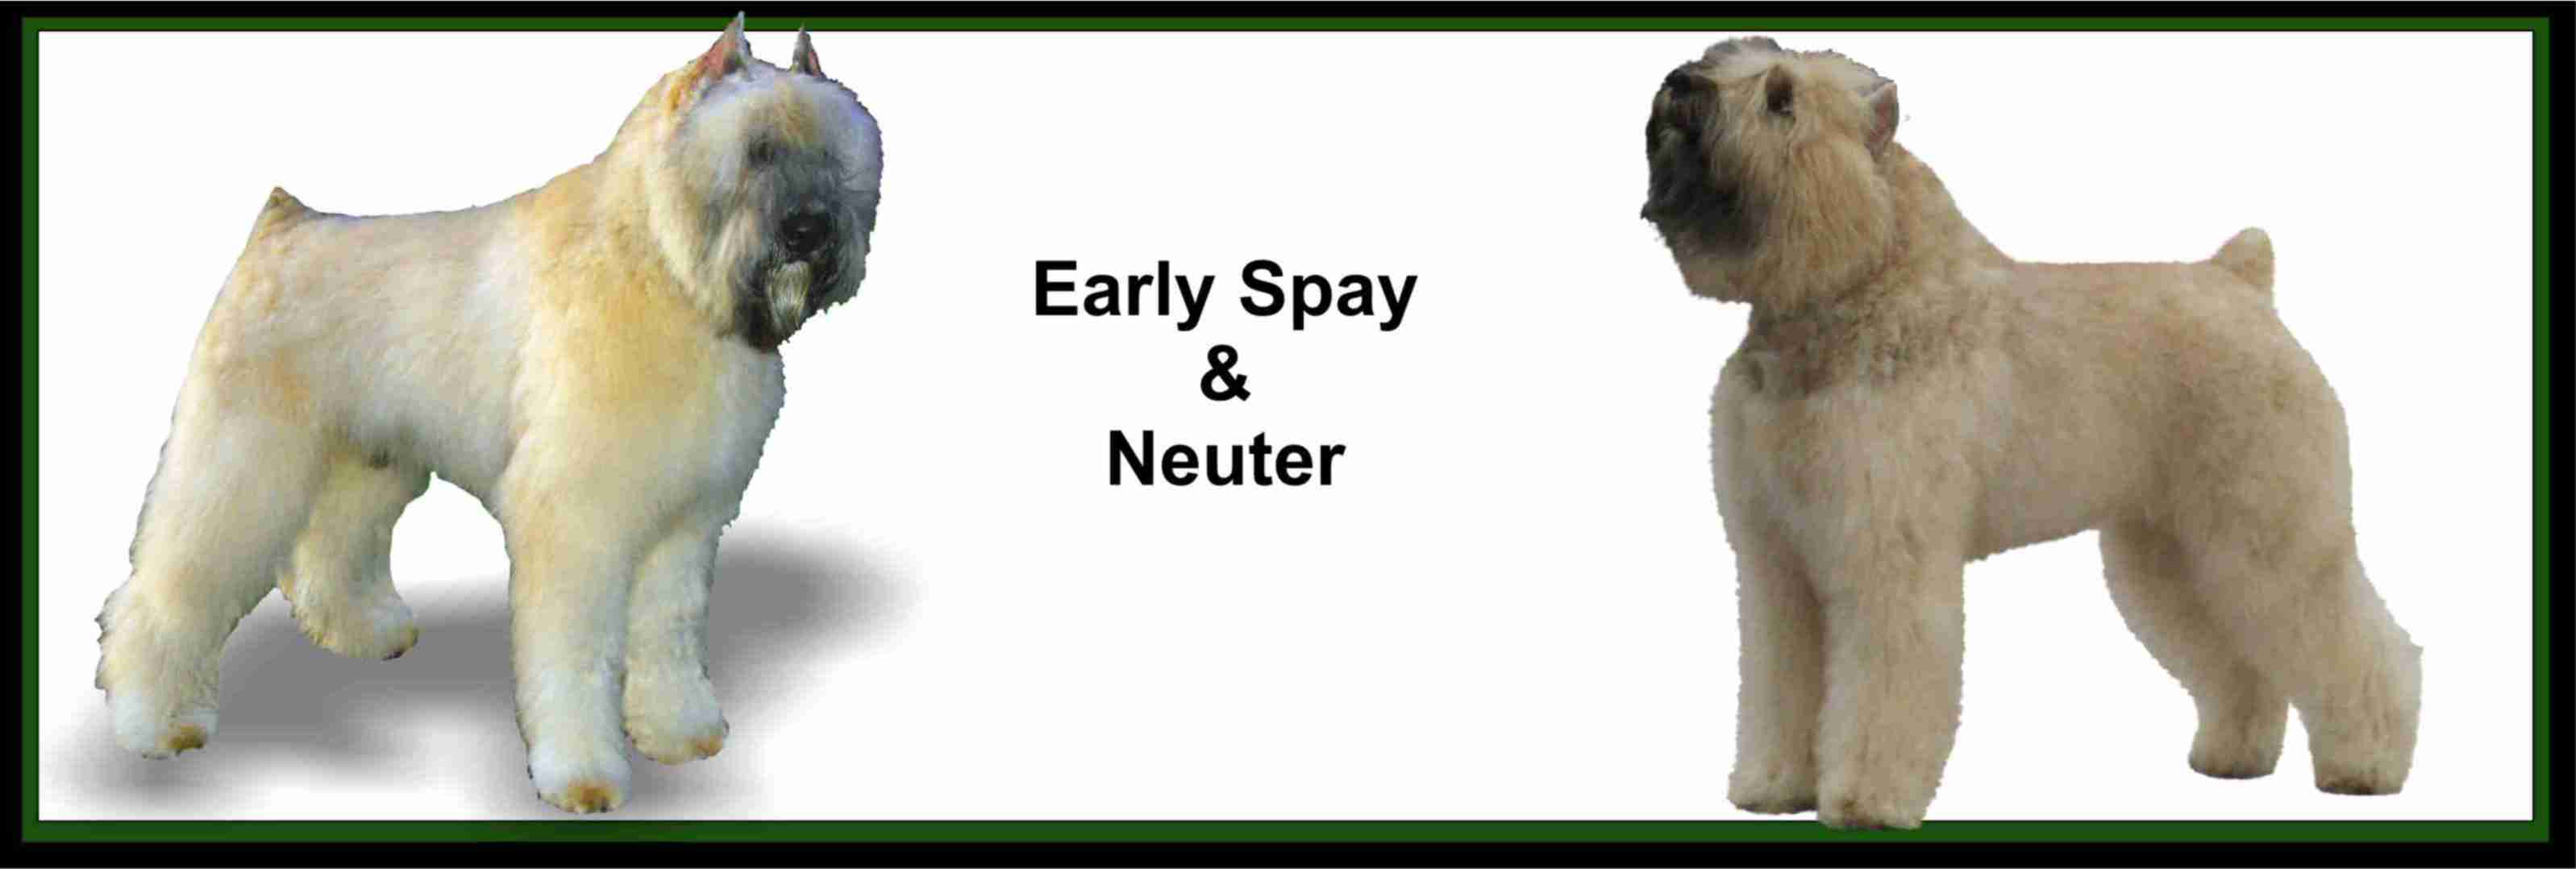 EARLY SPAY AND NUETER